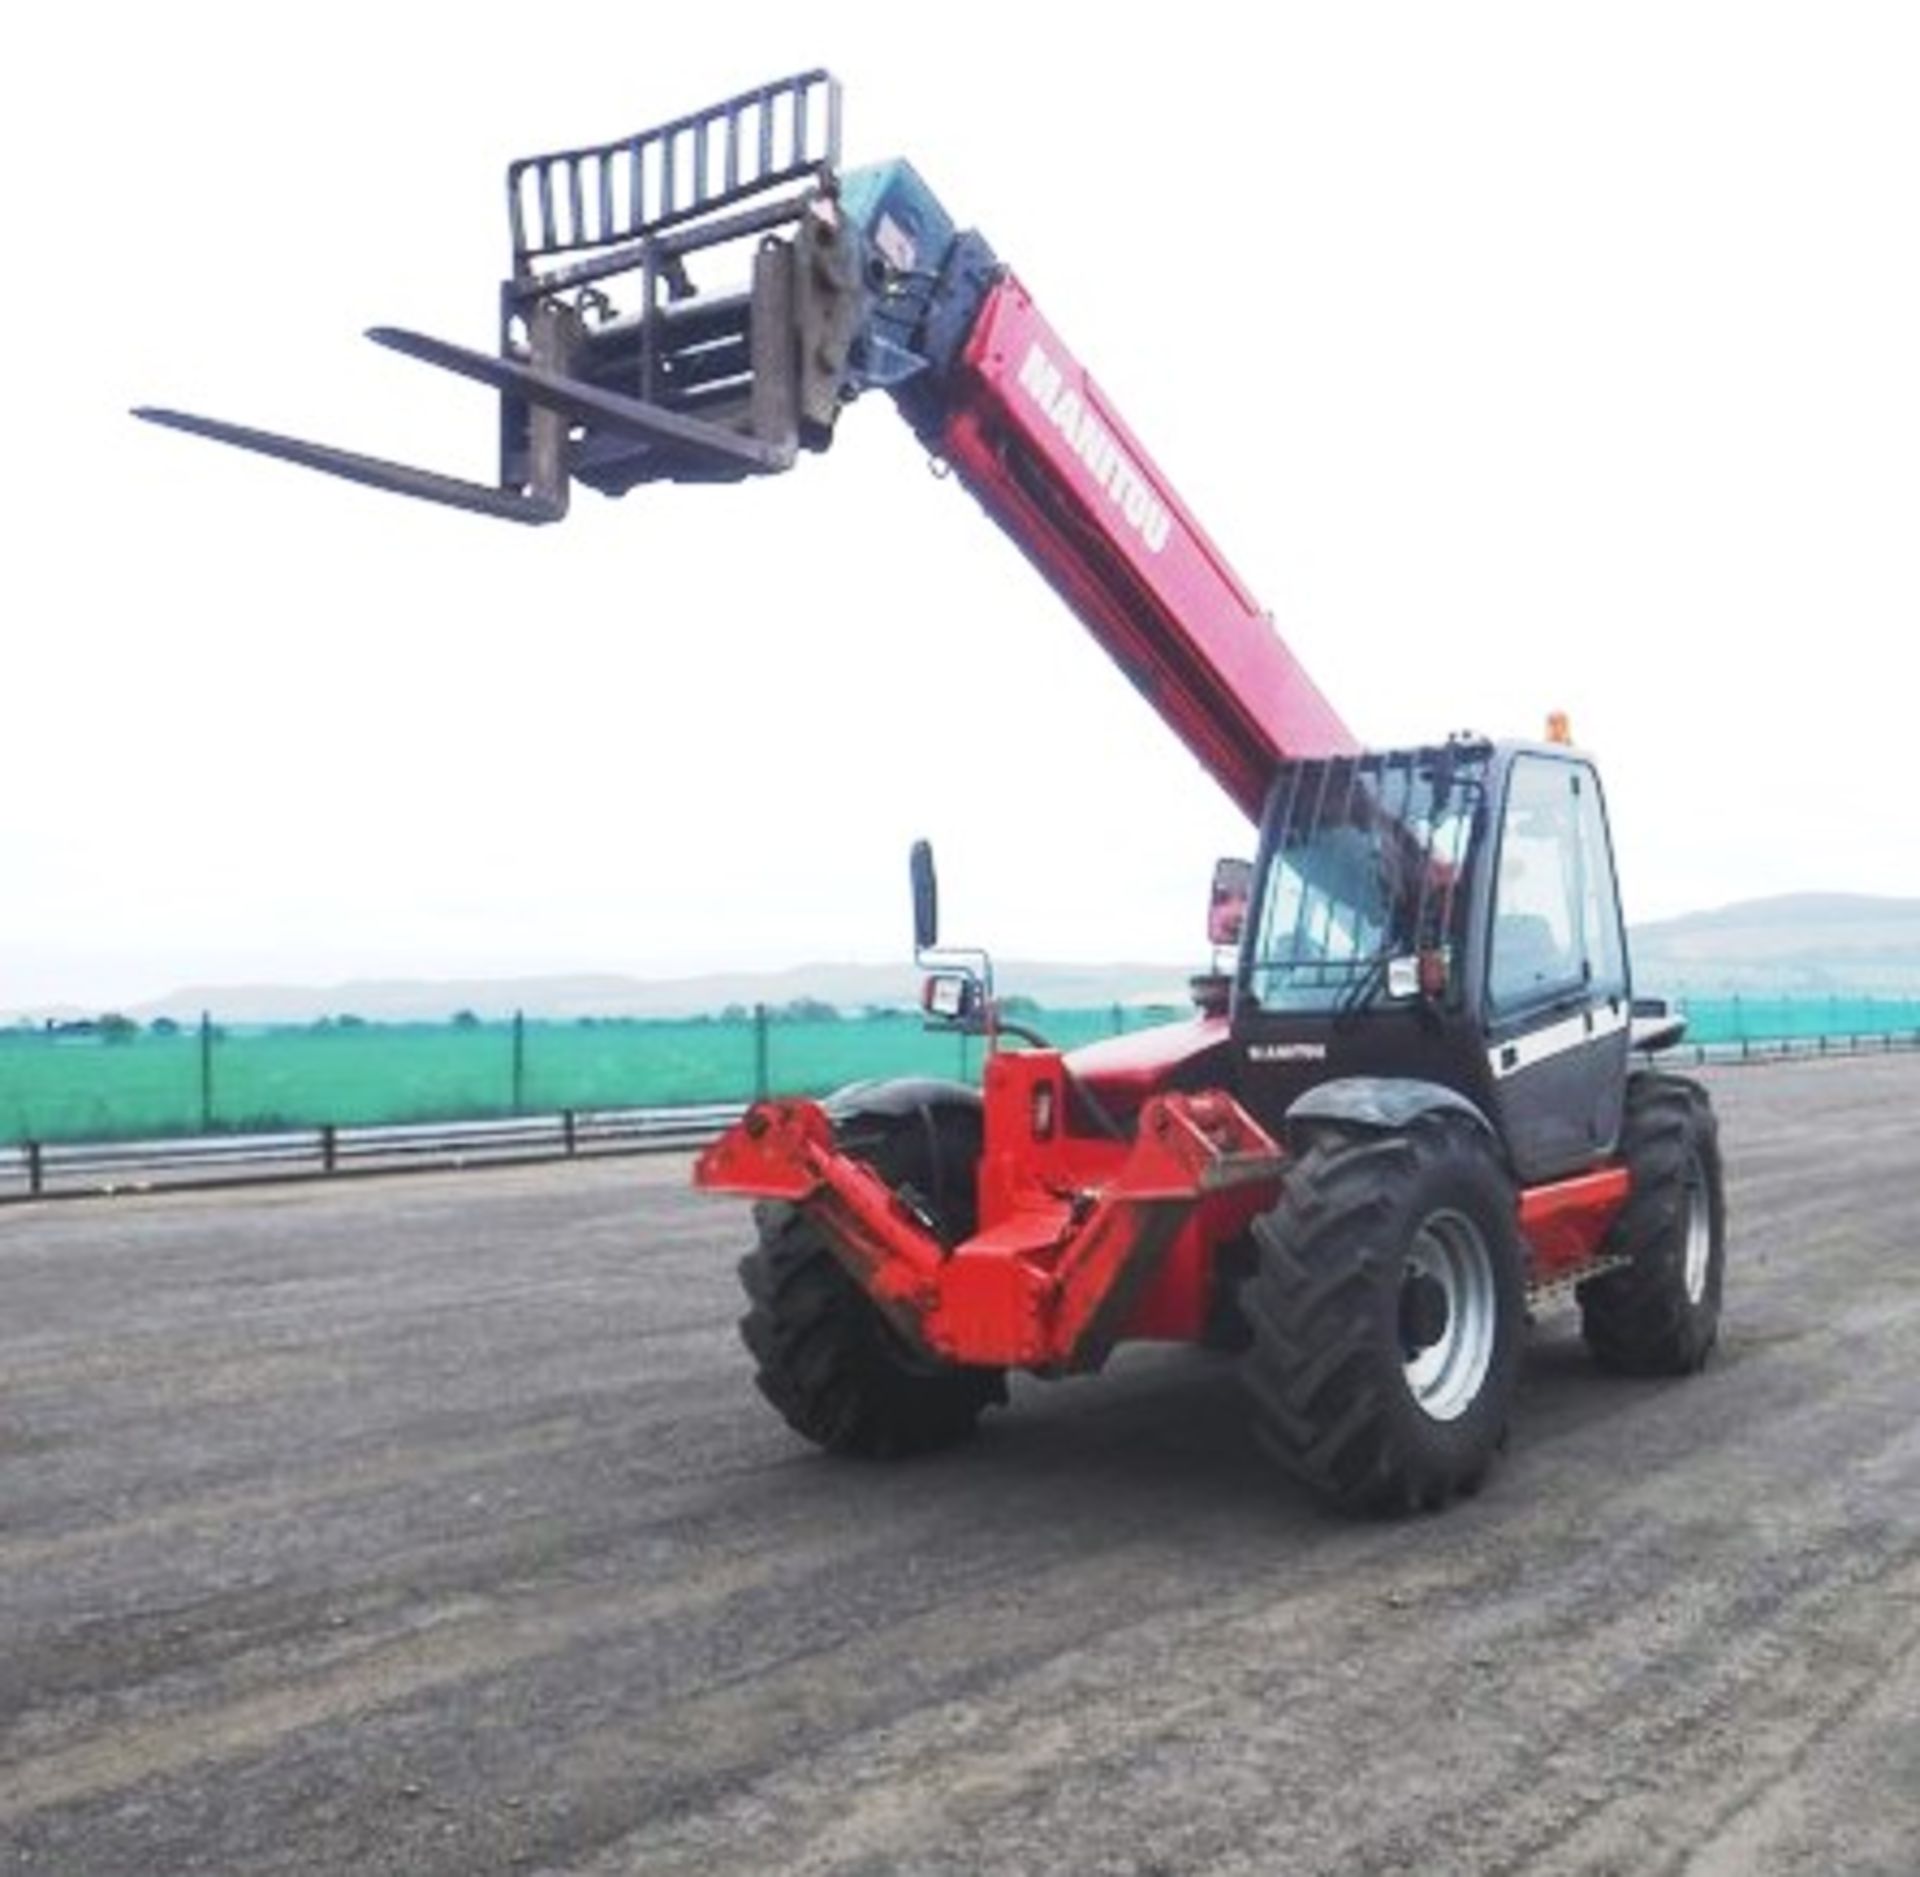 2006 MANITOU 14/35 TELEHANDLER c/w bucket & forks s/n 1230044. Reg no SP06 AXX. 2646HRS. - Image 12 of 16